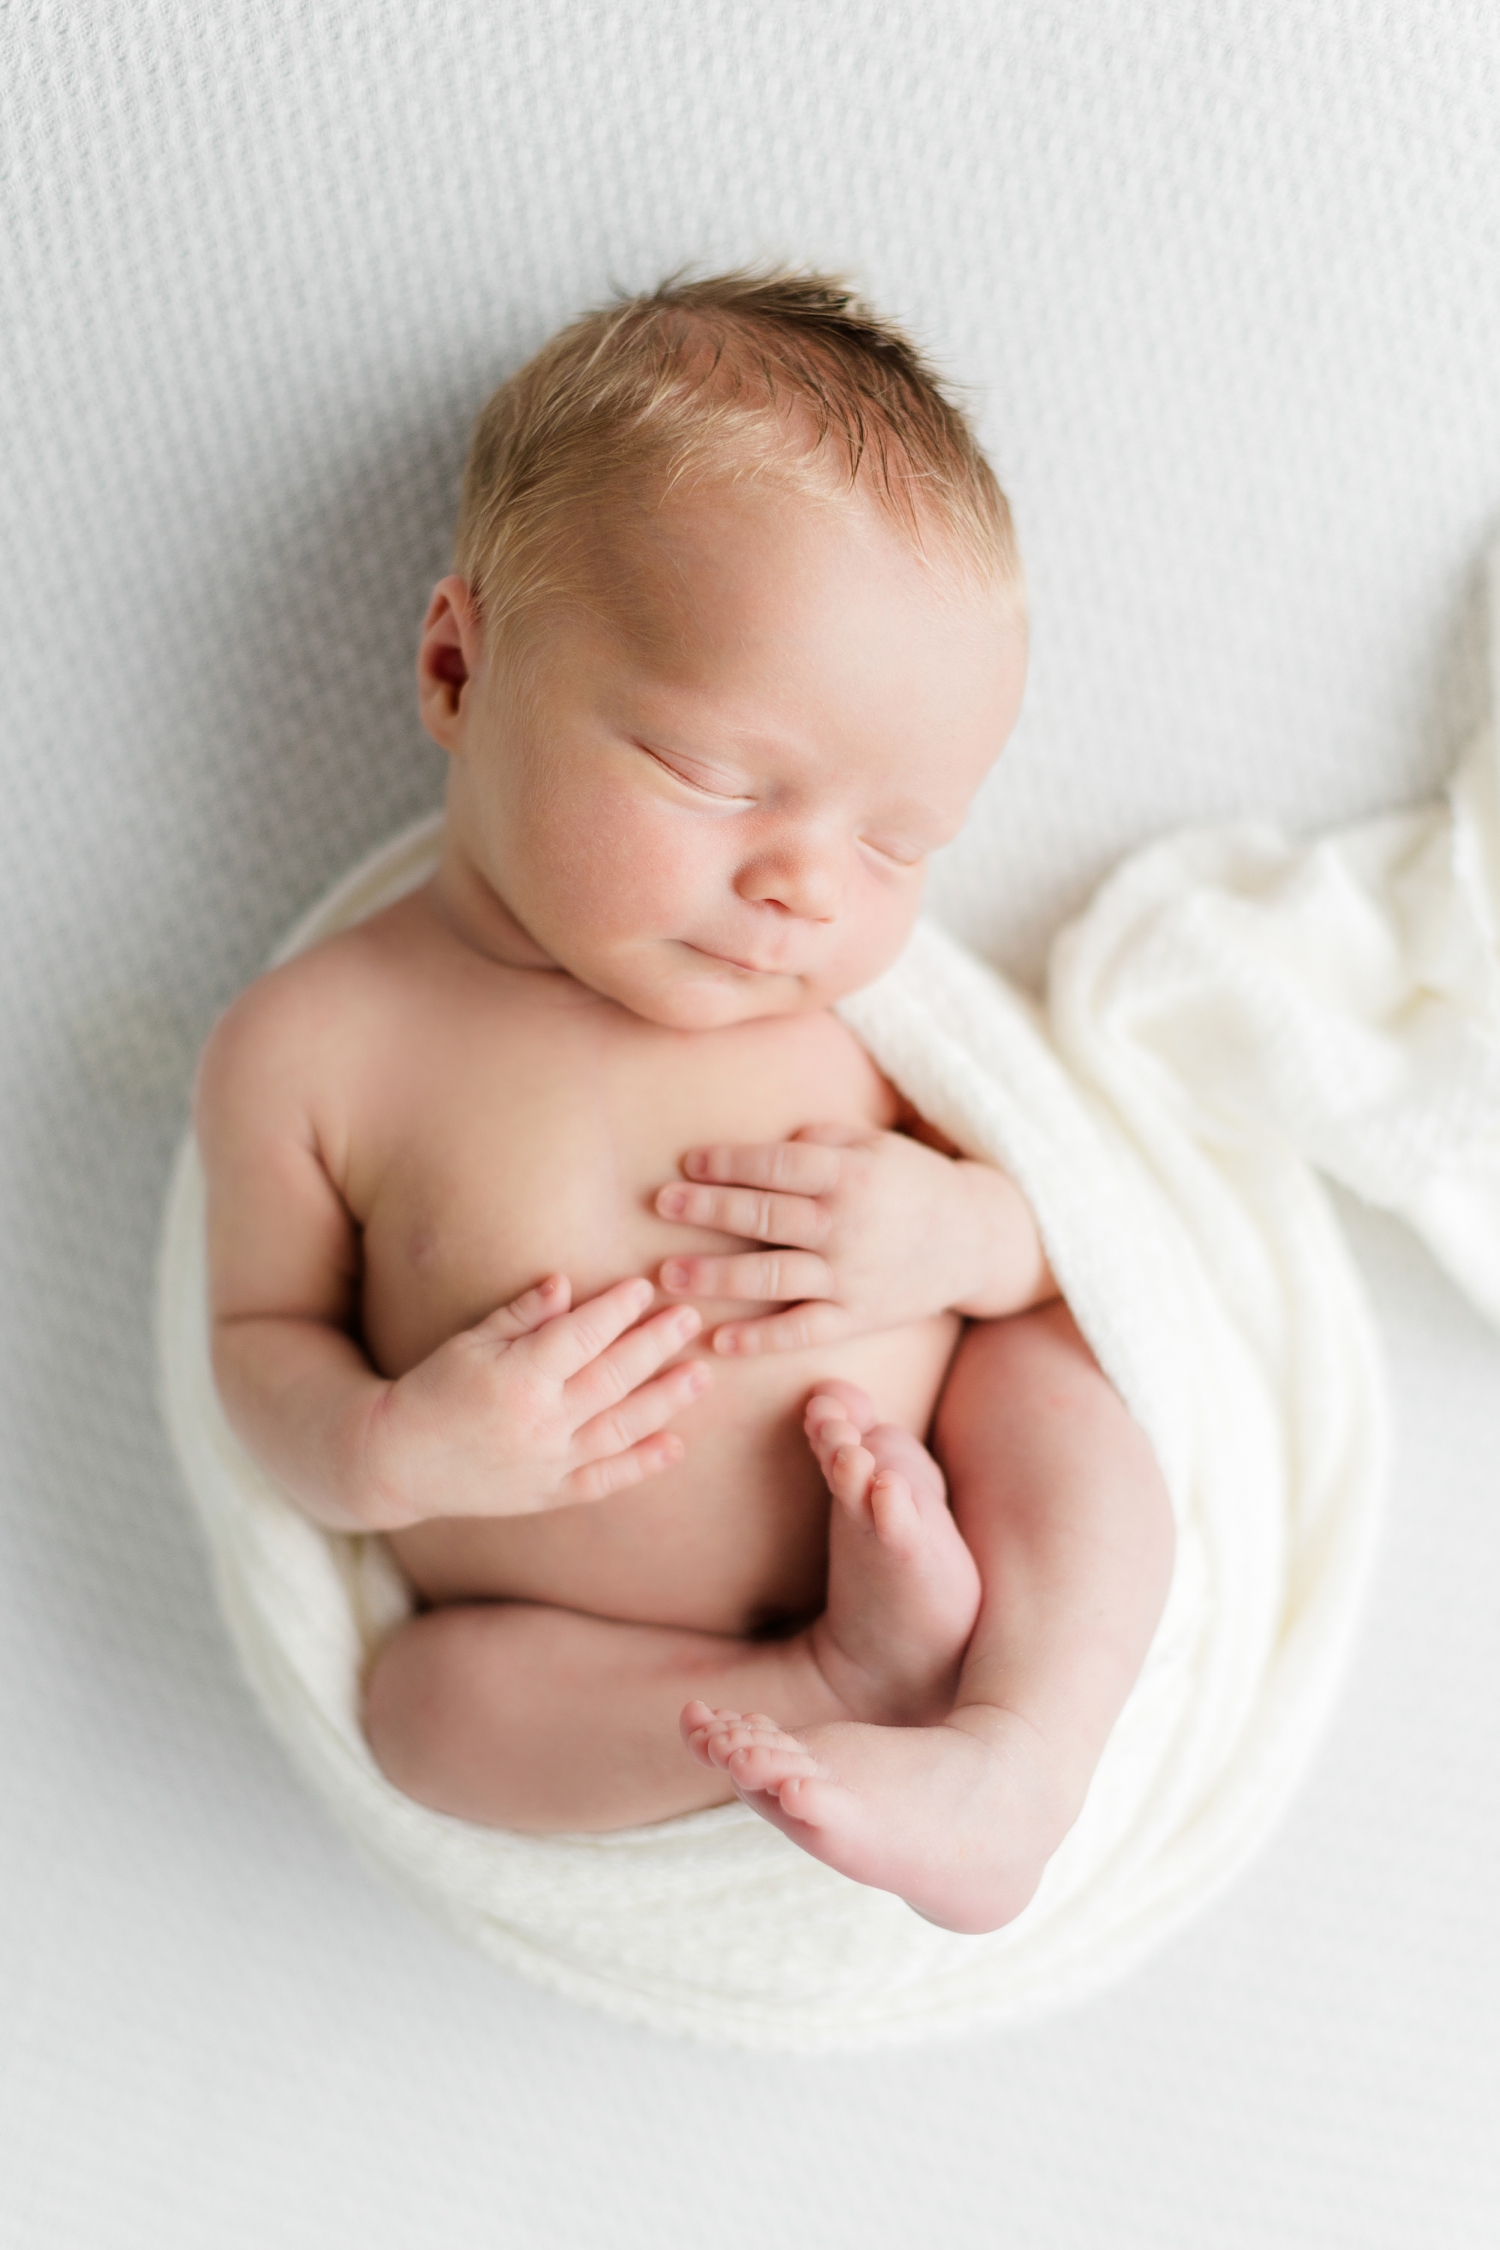 Baby Wyatt sleeps peacefully wrapped partially in a white swaddle | CB Studio